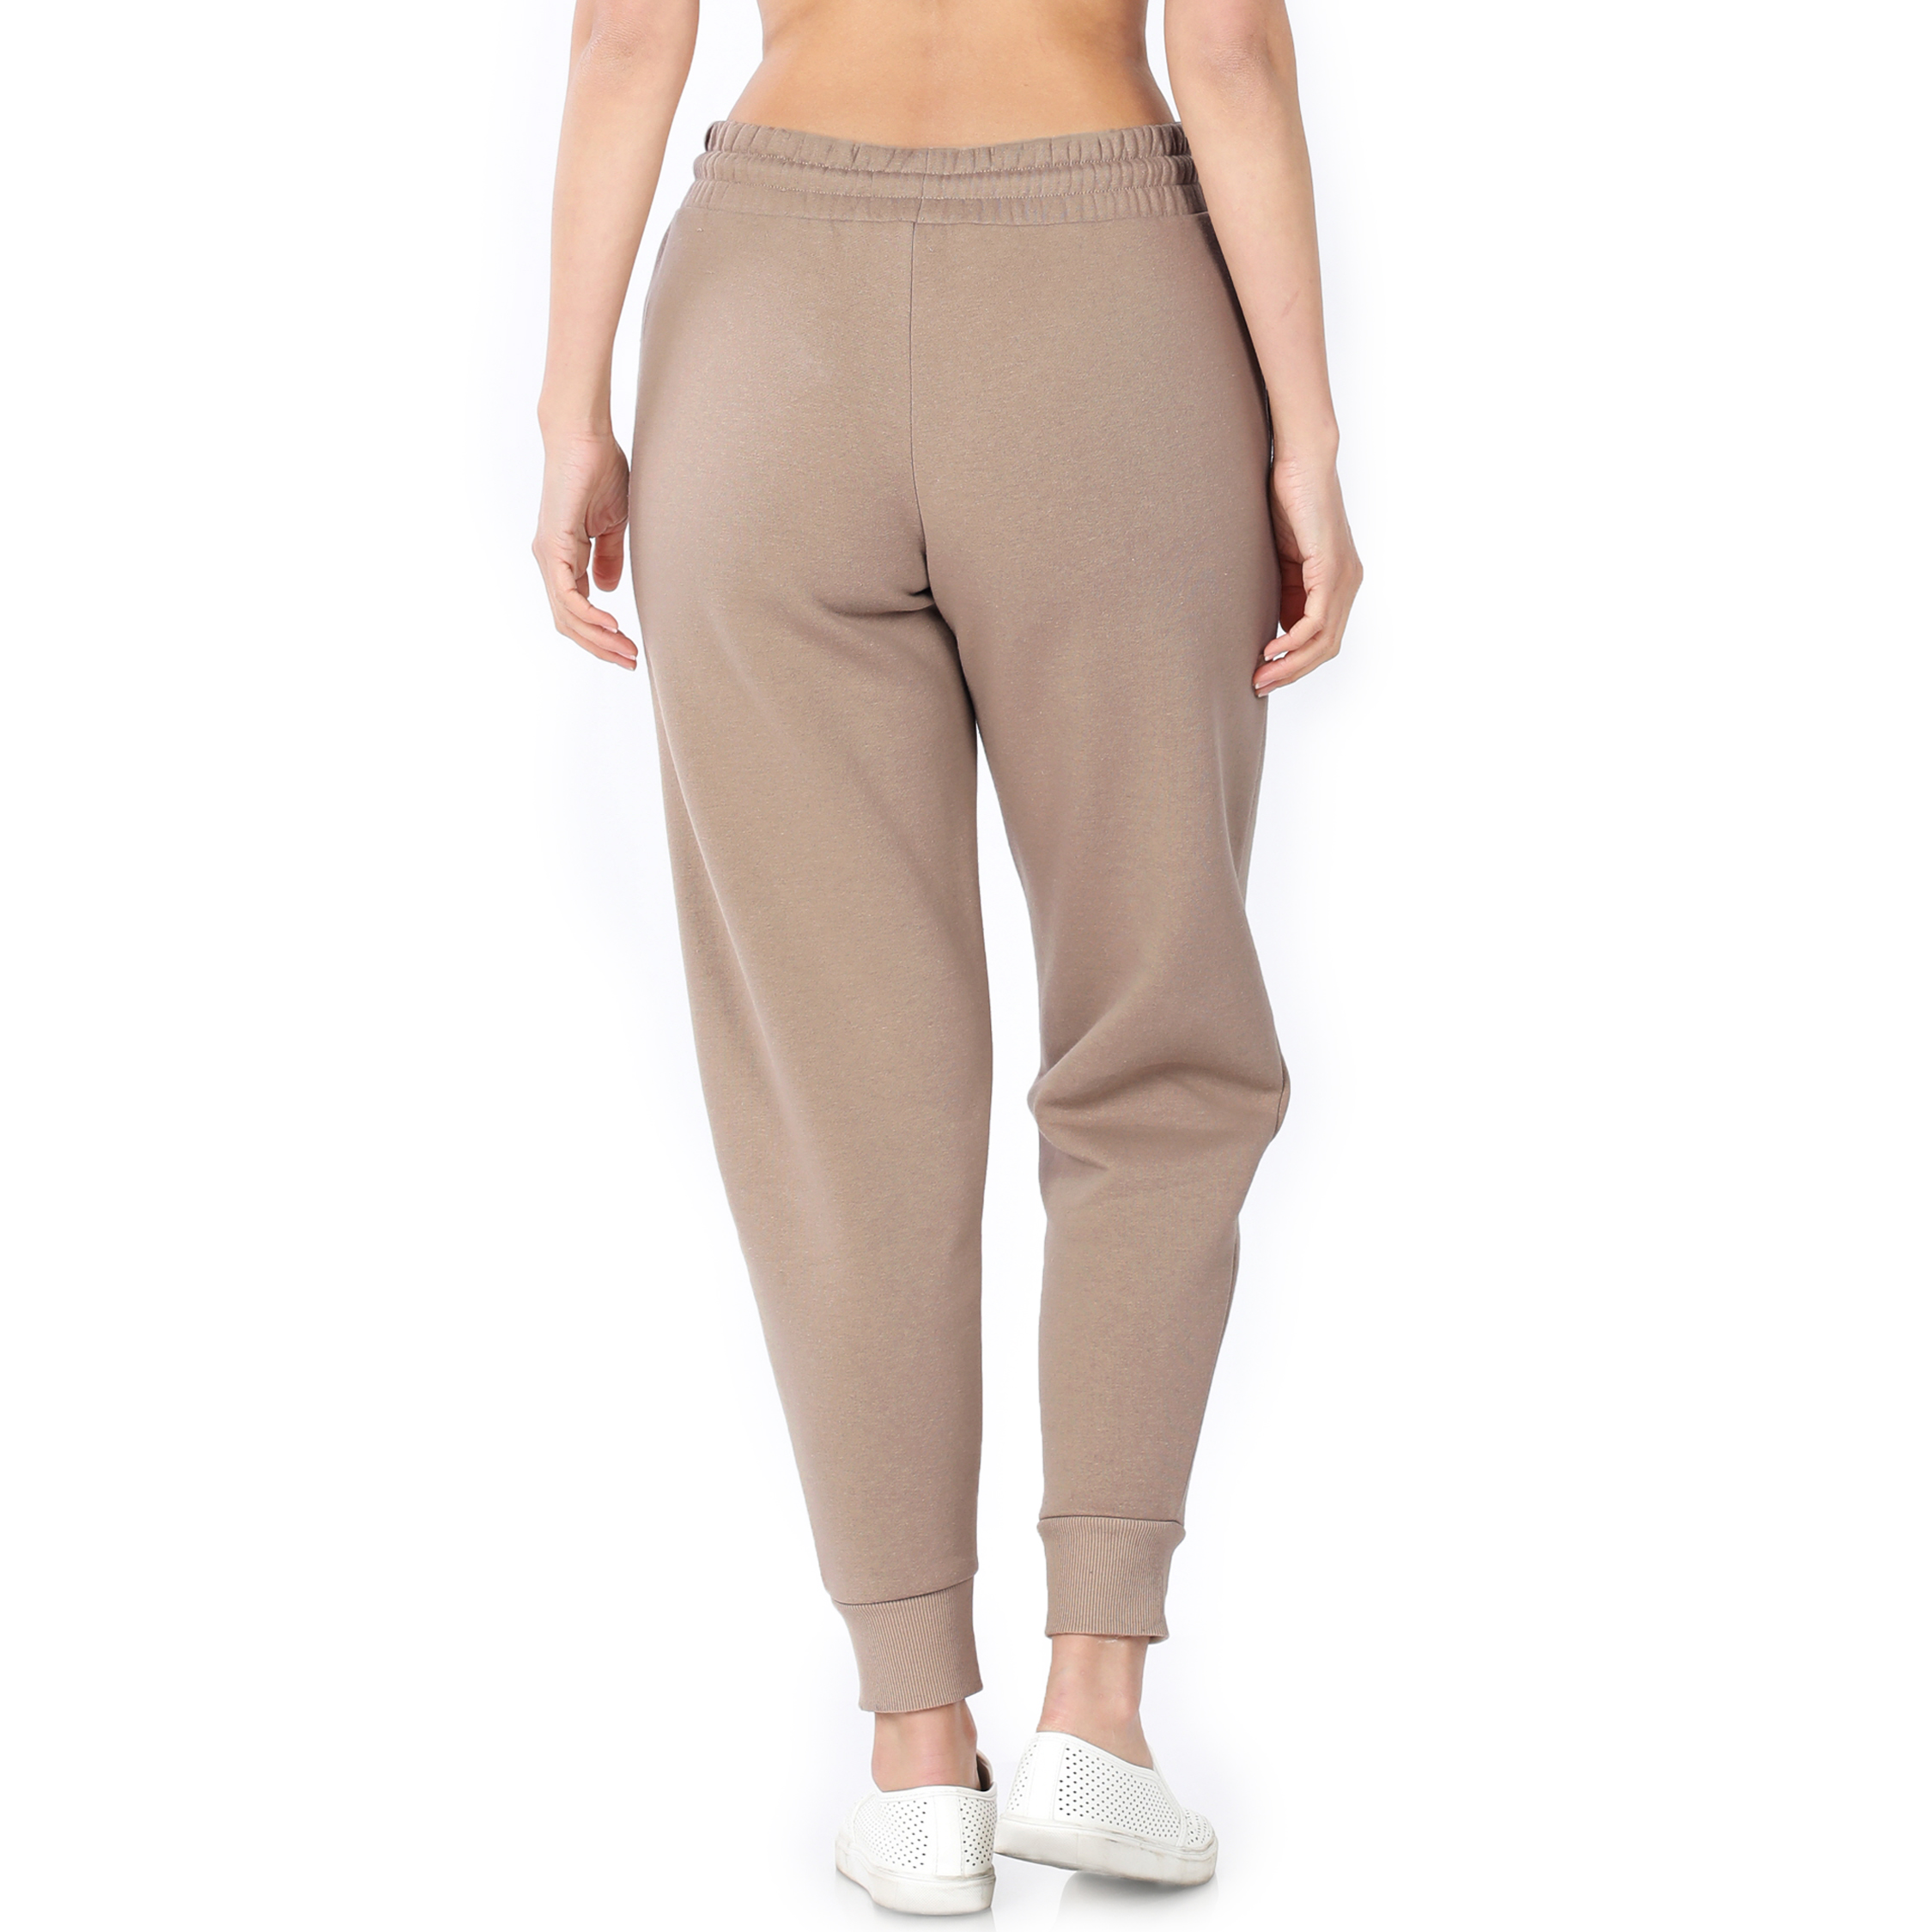 Women's Joggers Sweatpants Workout Pants with pockets,  Elastic Waistband with Draw String,